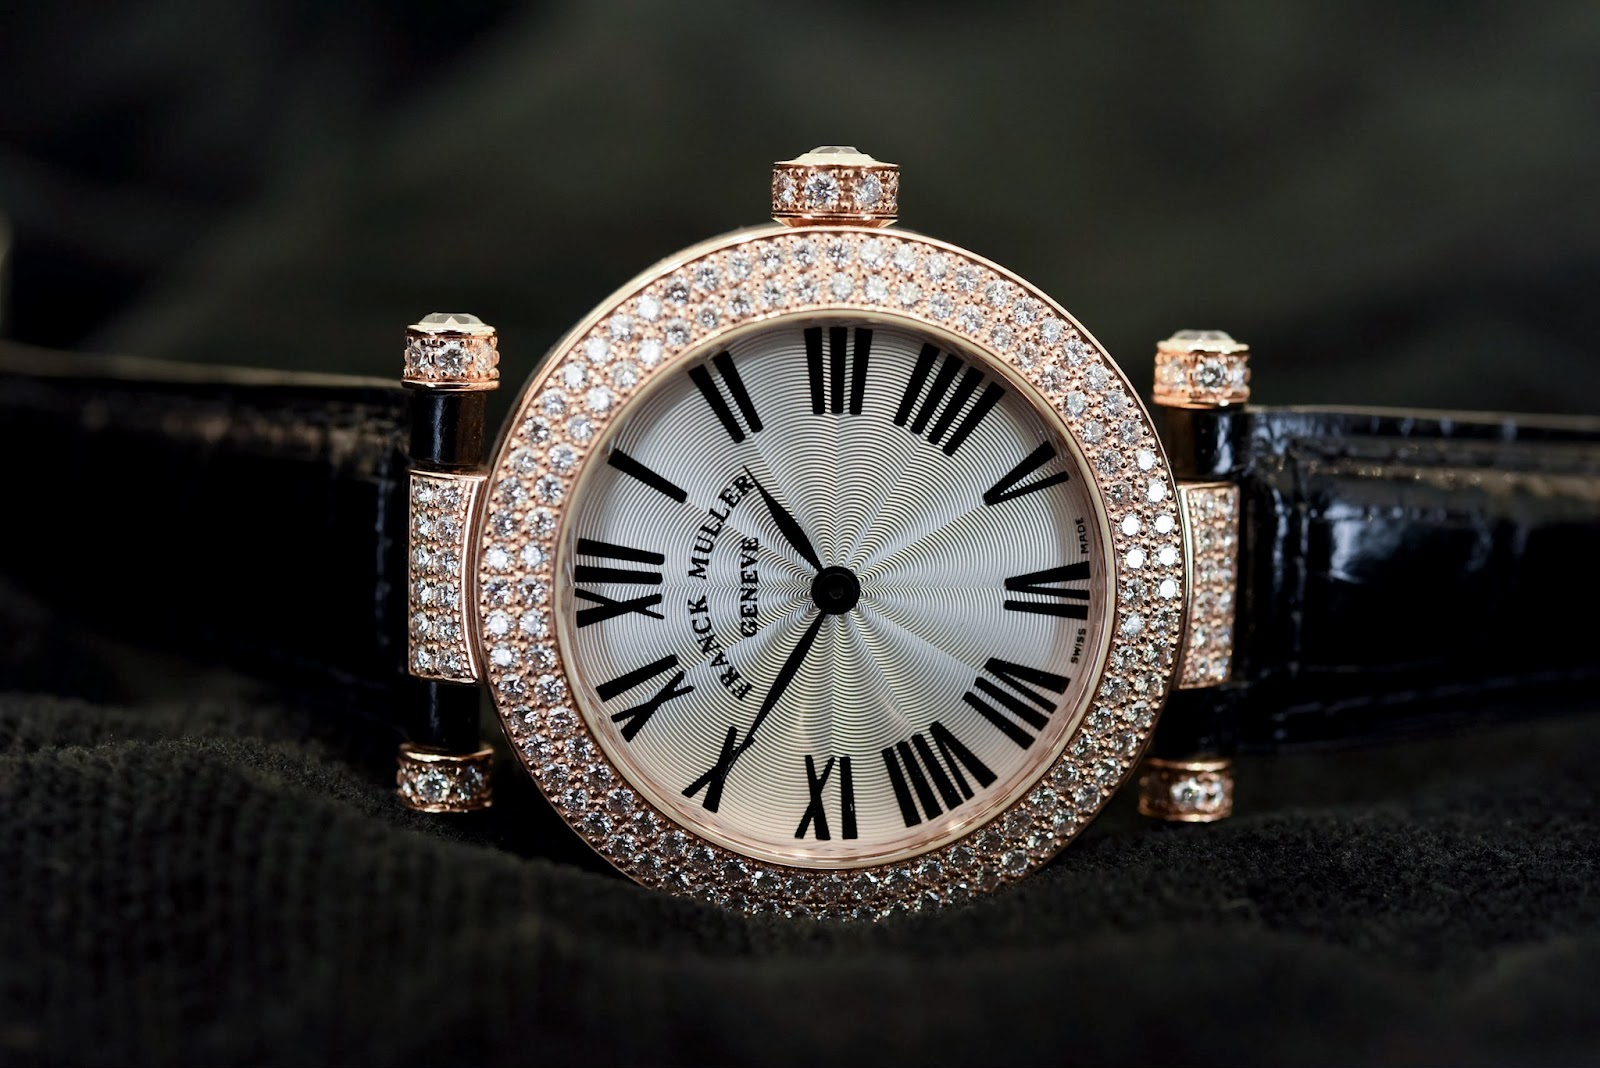 CH Premier Jewelers - Franck Muller’s Quirky Cool Watches